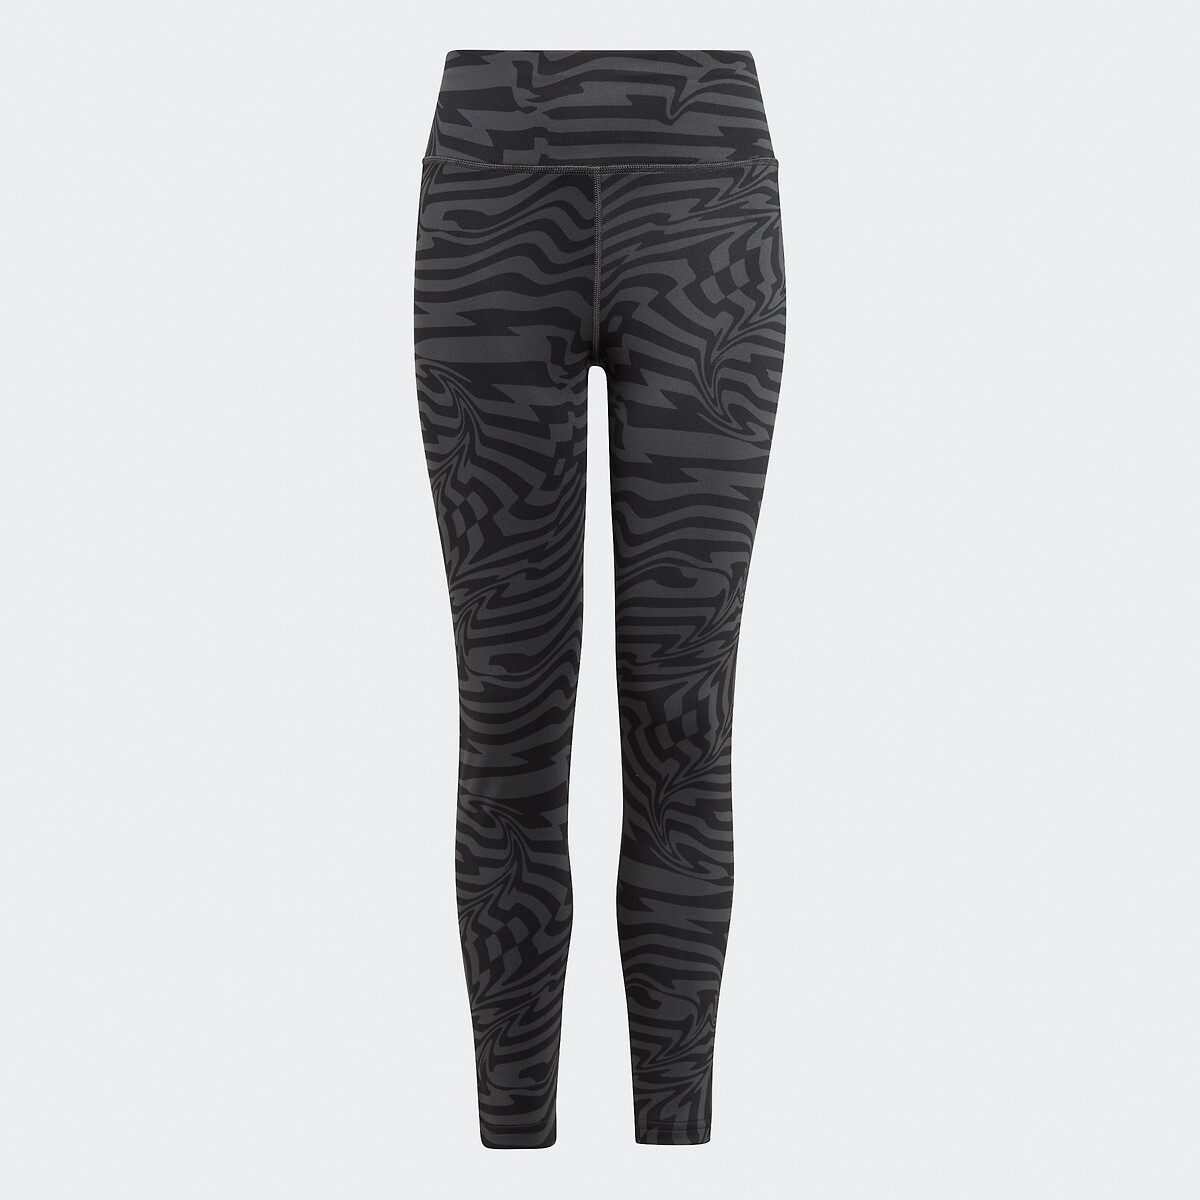 Image of High Waist Leggings with Pockets